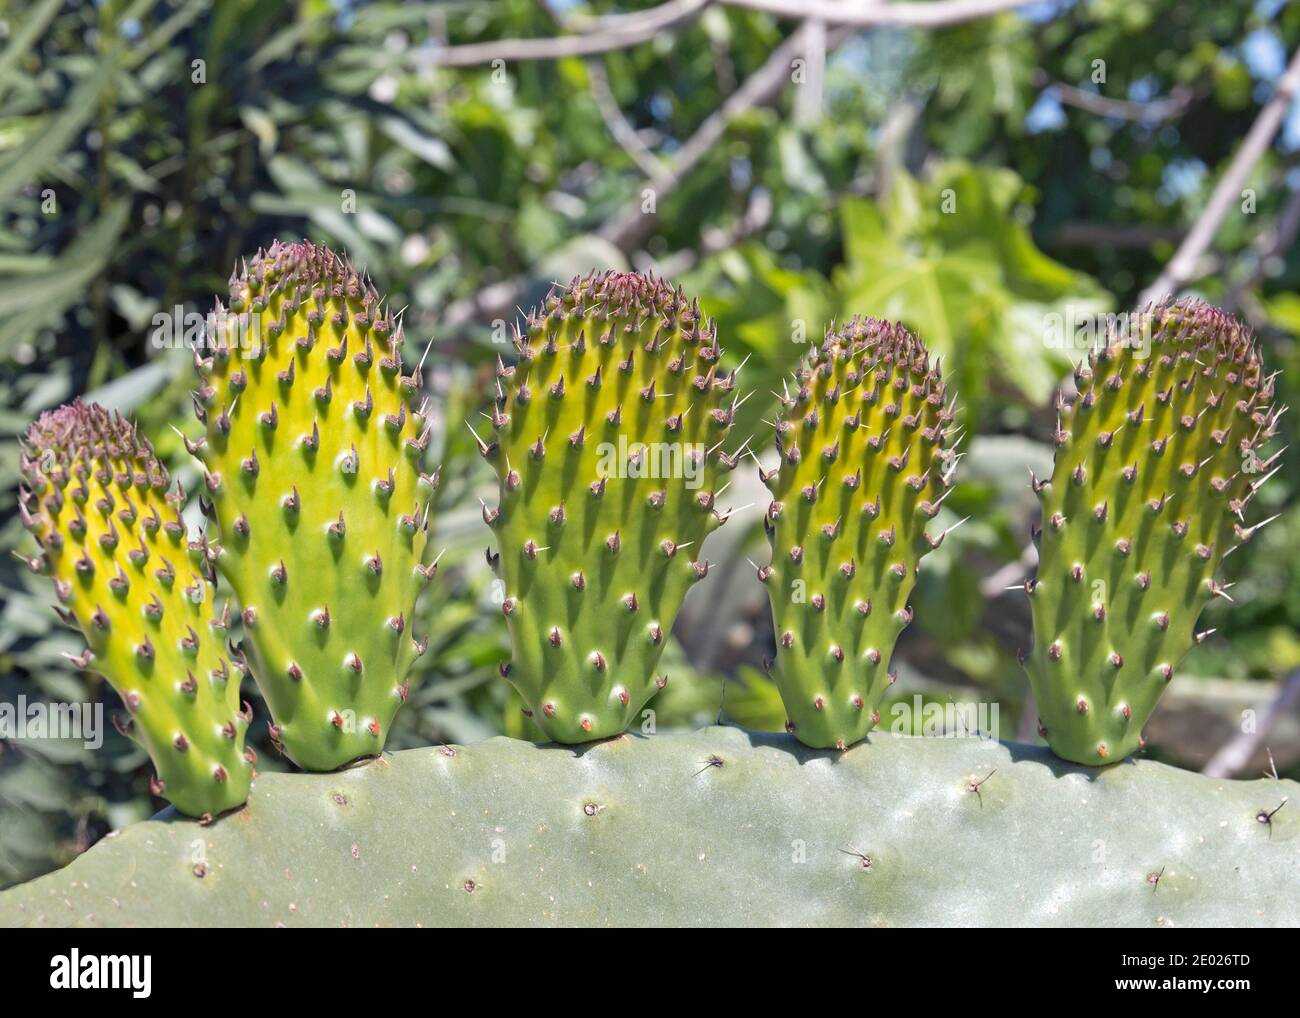 The  prickly pear cactus is an edible plant and grows in South America, Mexico, the U.S.A., Australia and the Mediterranean. Stock Photo